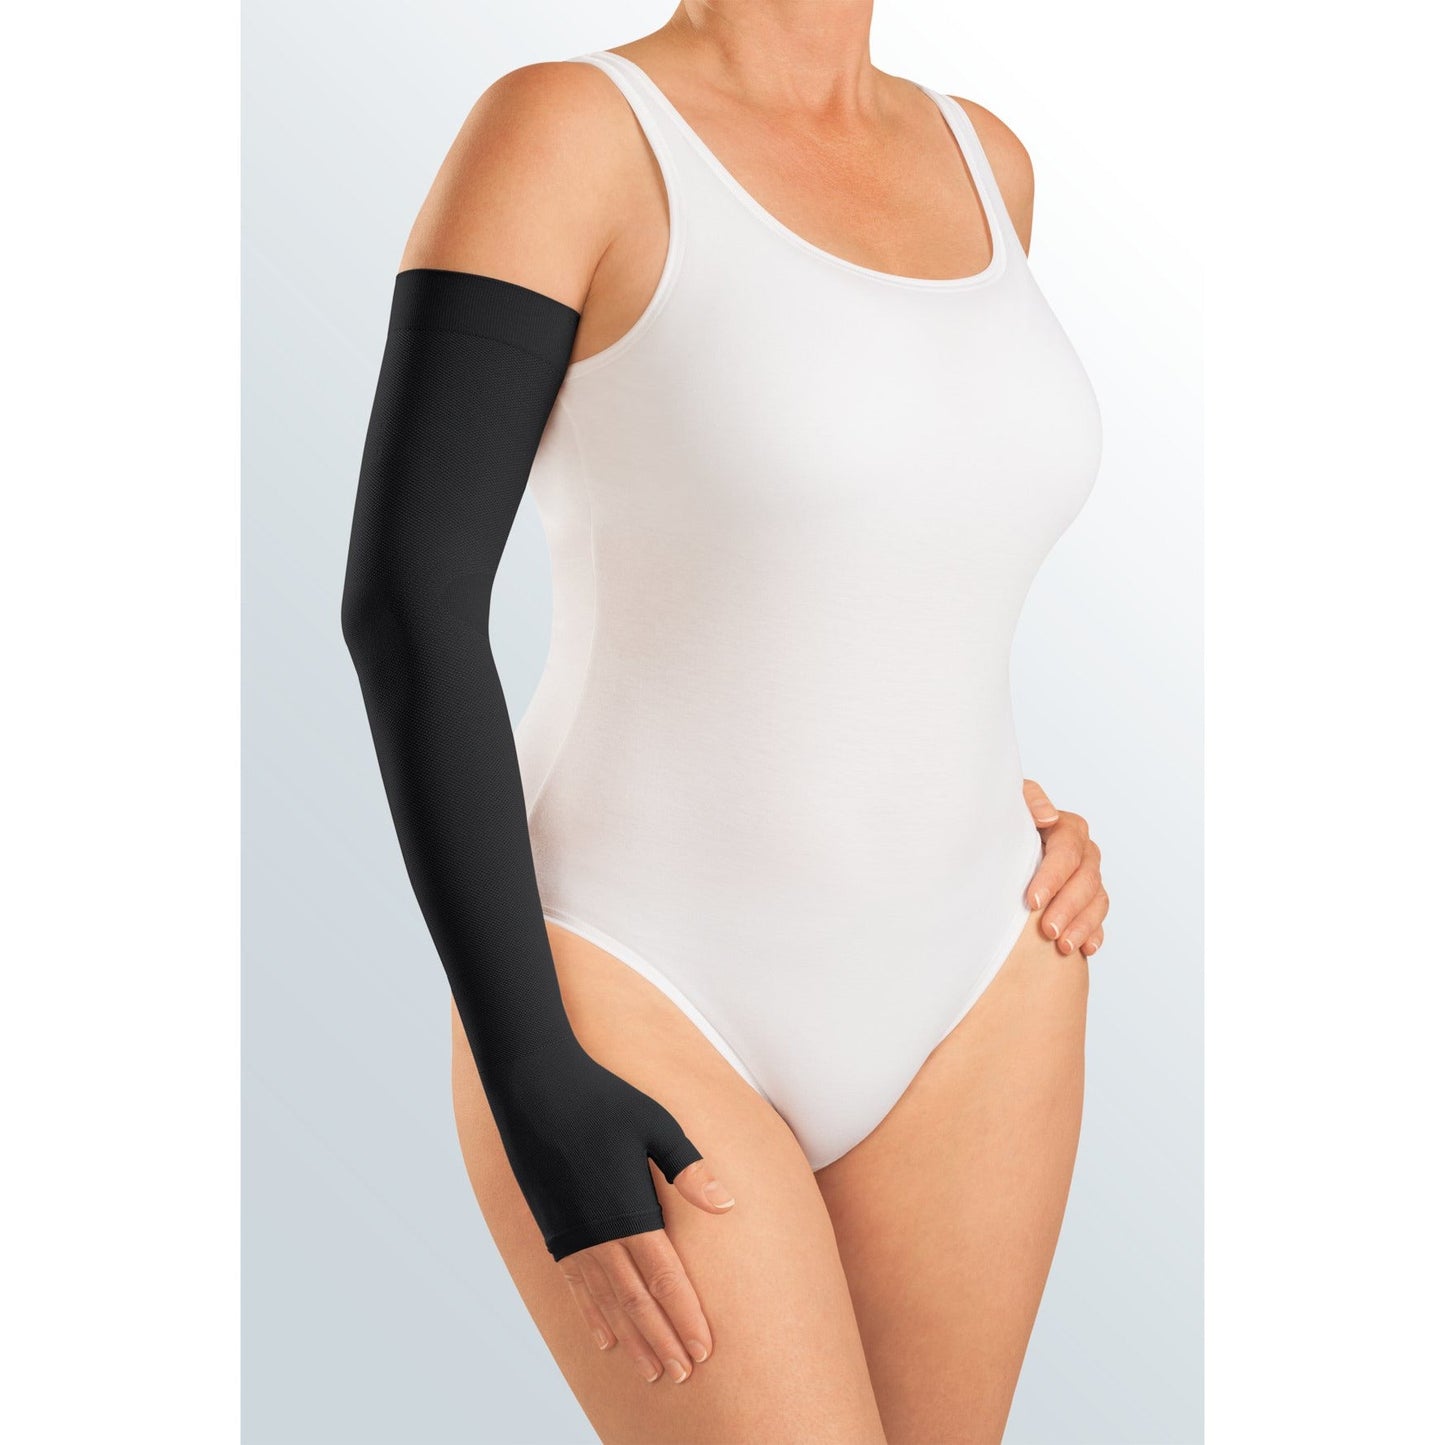 Mediven Harmony Armsleeve 30-40 mmHg w/ Gauntlet and Beaded Silicone Top Band [OVERSTOCK]